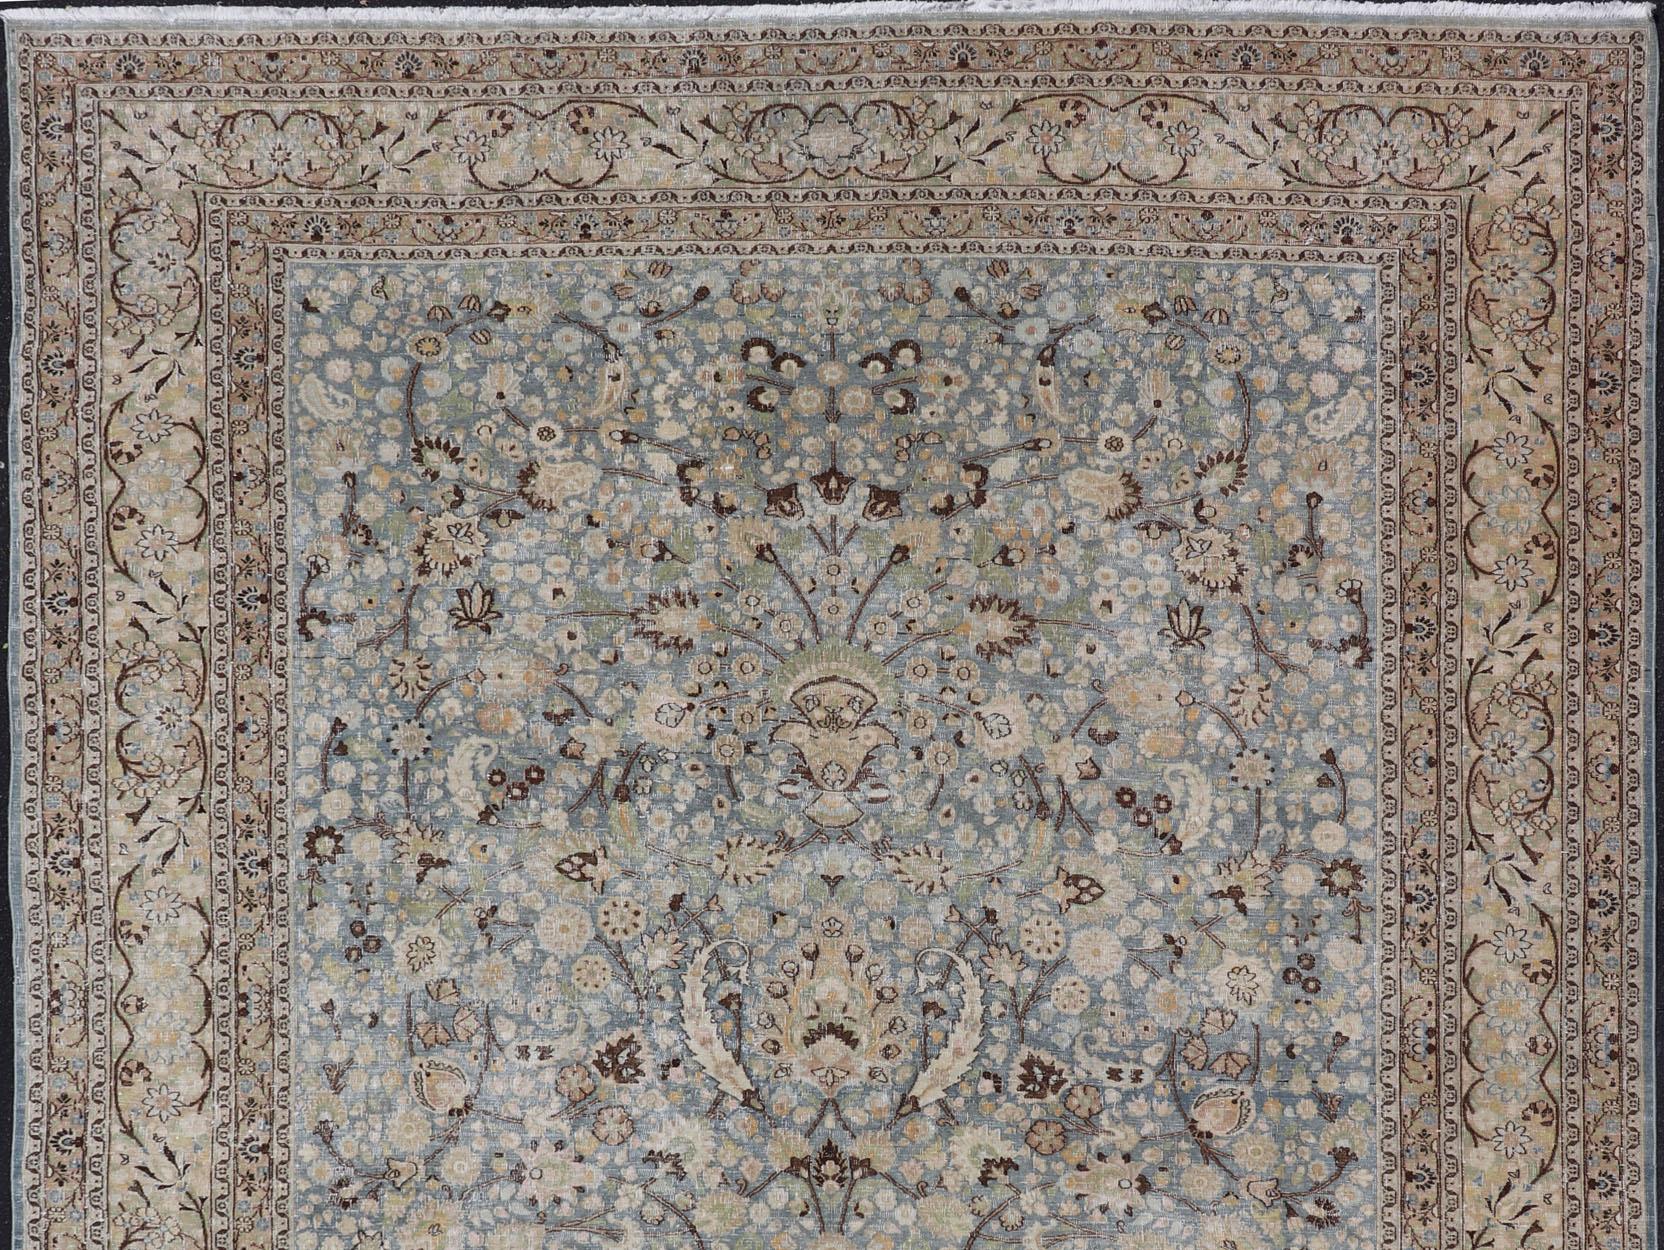 Antique Persian Khorassan Rug with All-Over Floral Design in Soft Blue Tones For Sale 4